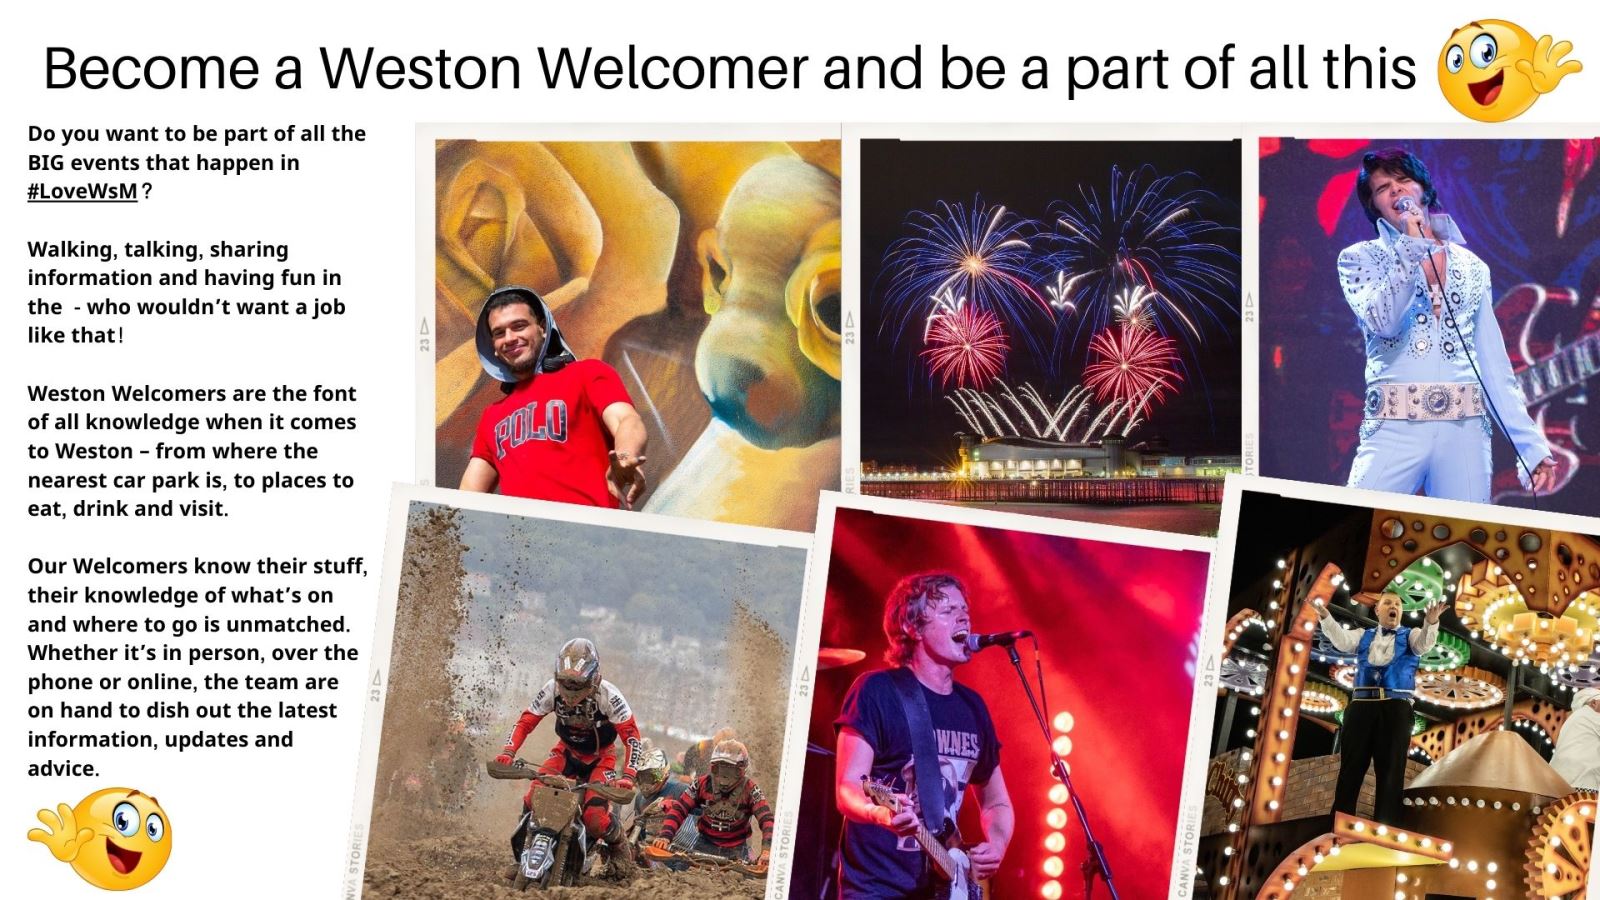 A collage of several images featuring singers, fireworks, motorbike racing, Elvis impersonators and a carnival float